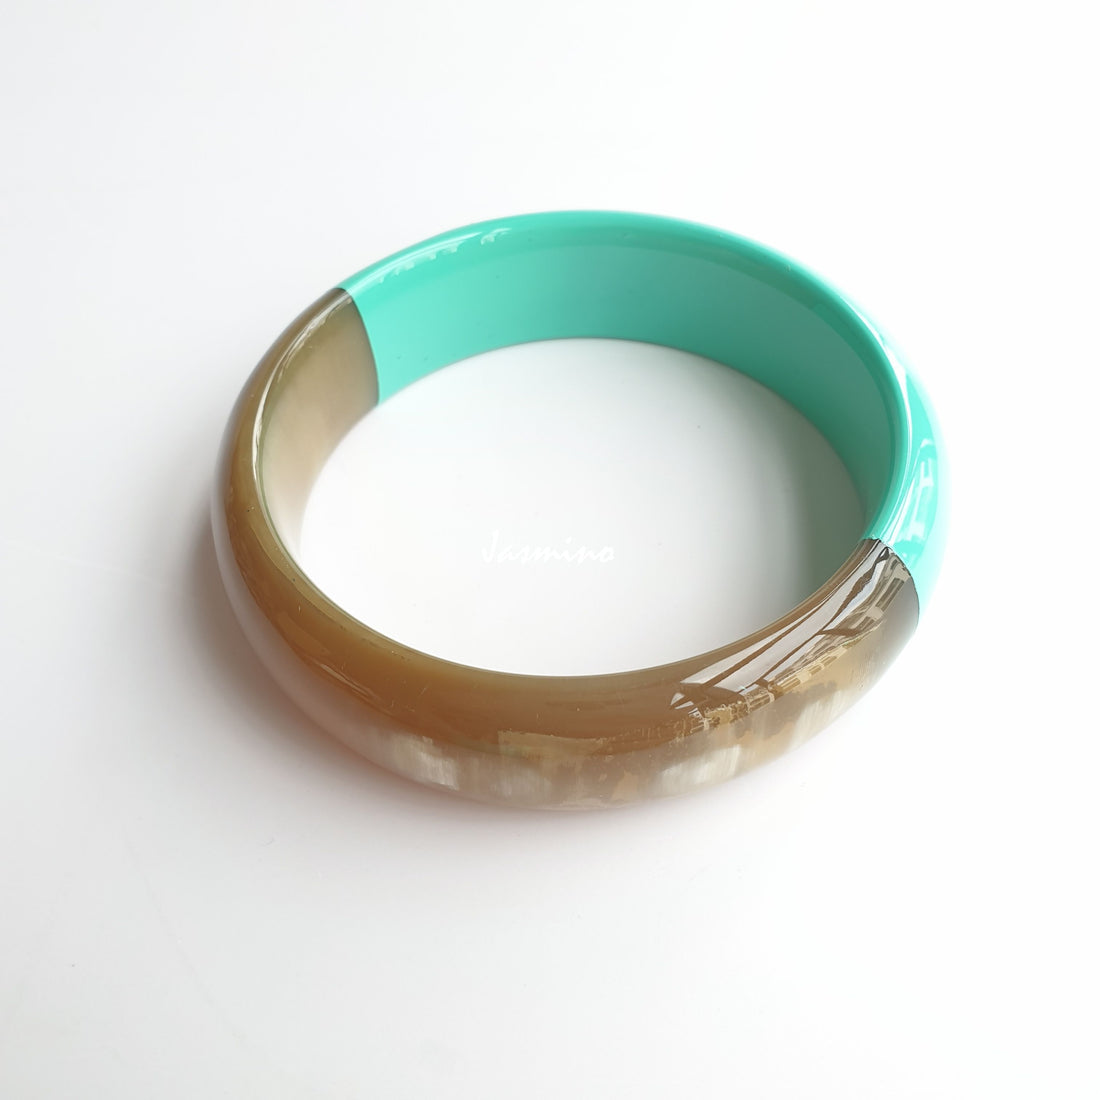 unique handmade Vintage thin bangle bracelet features a brown half and a turquoise half made of natural buffalo horn for women on Thanksgiving